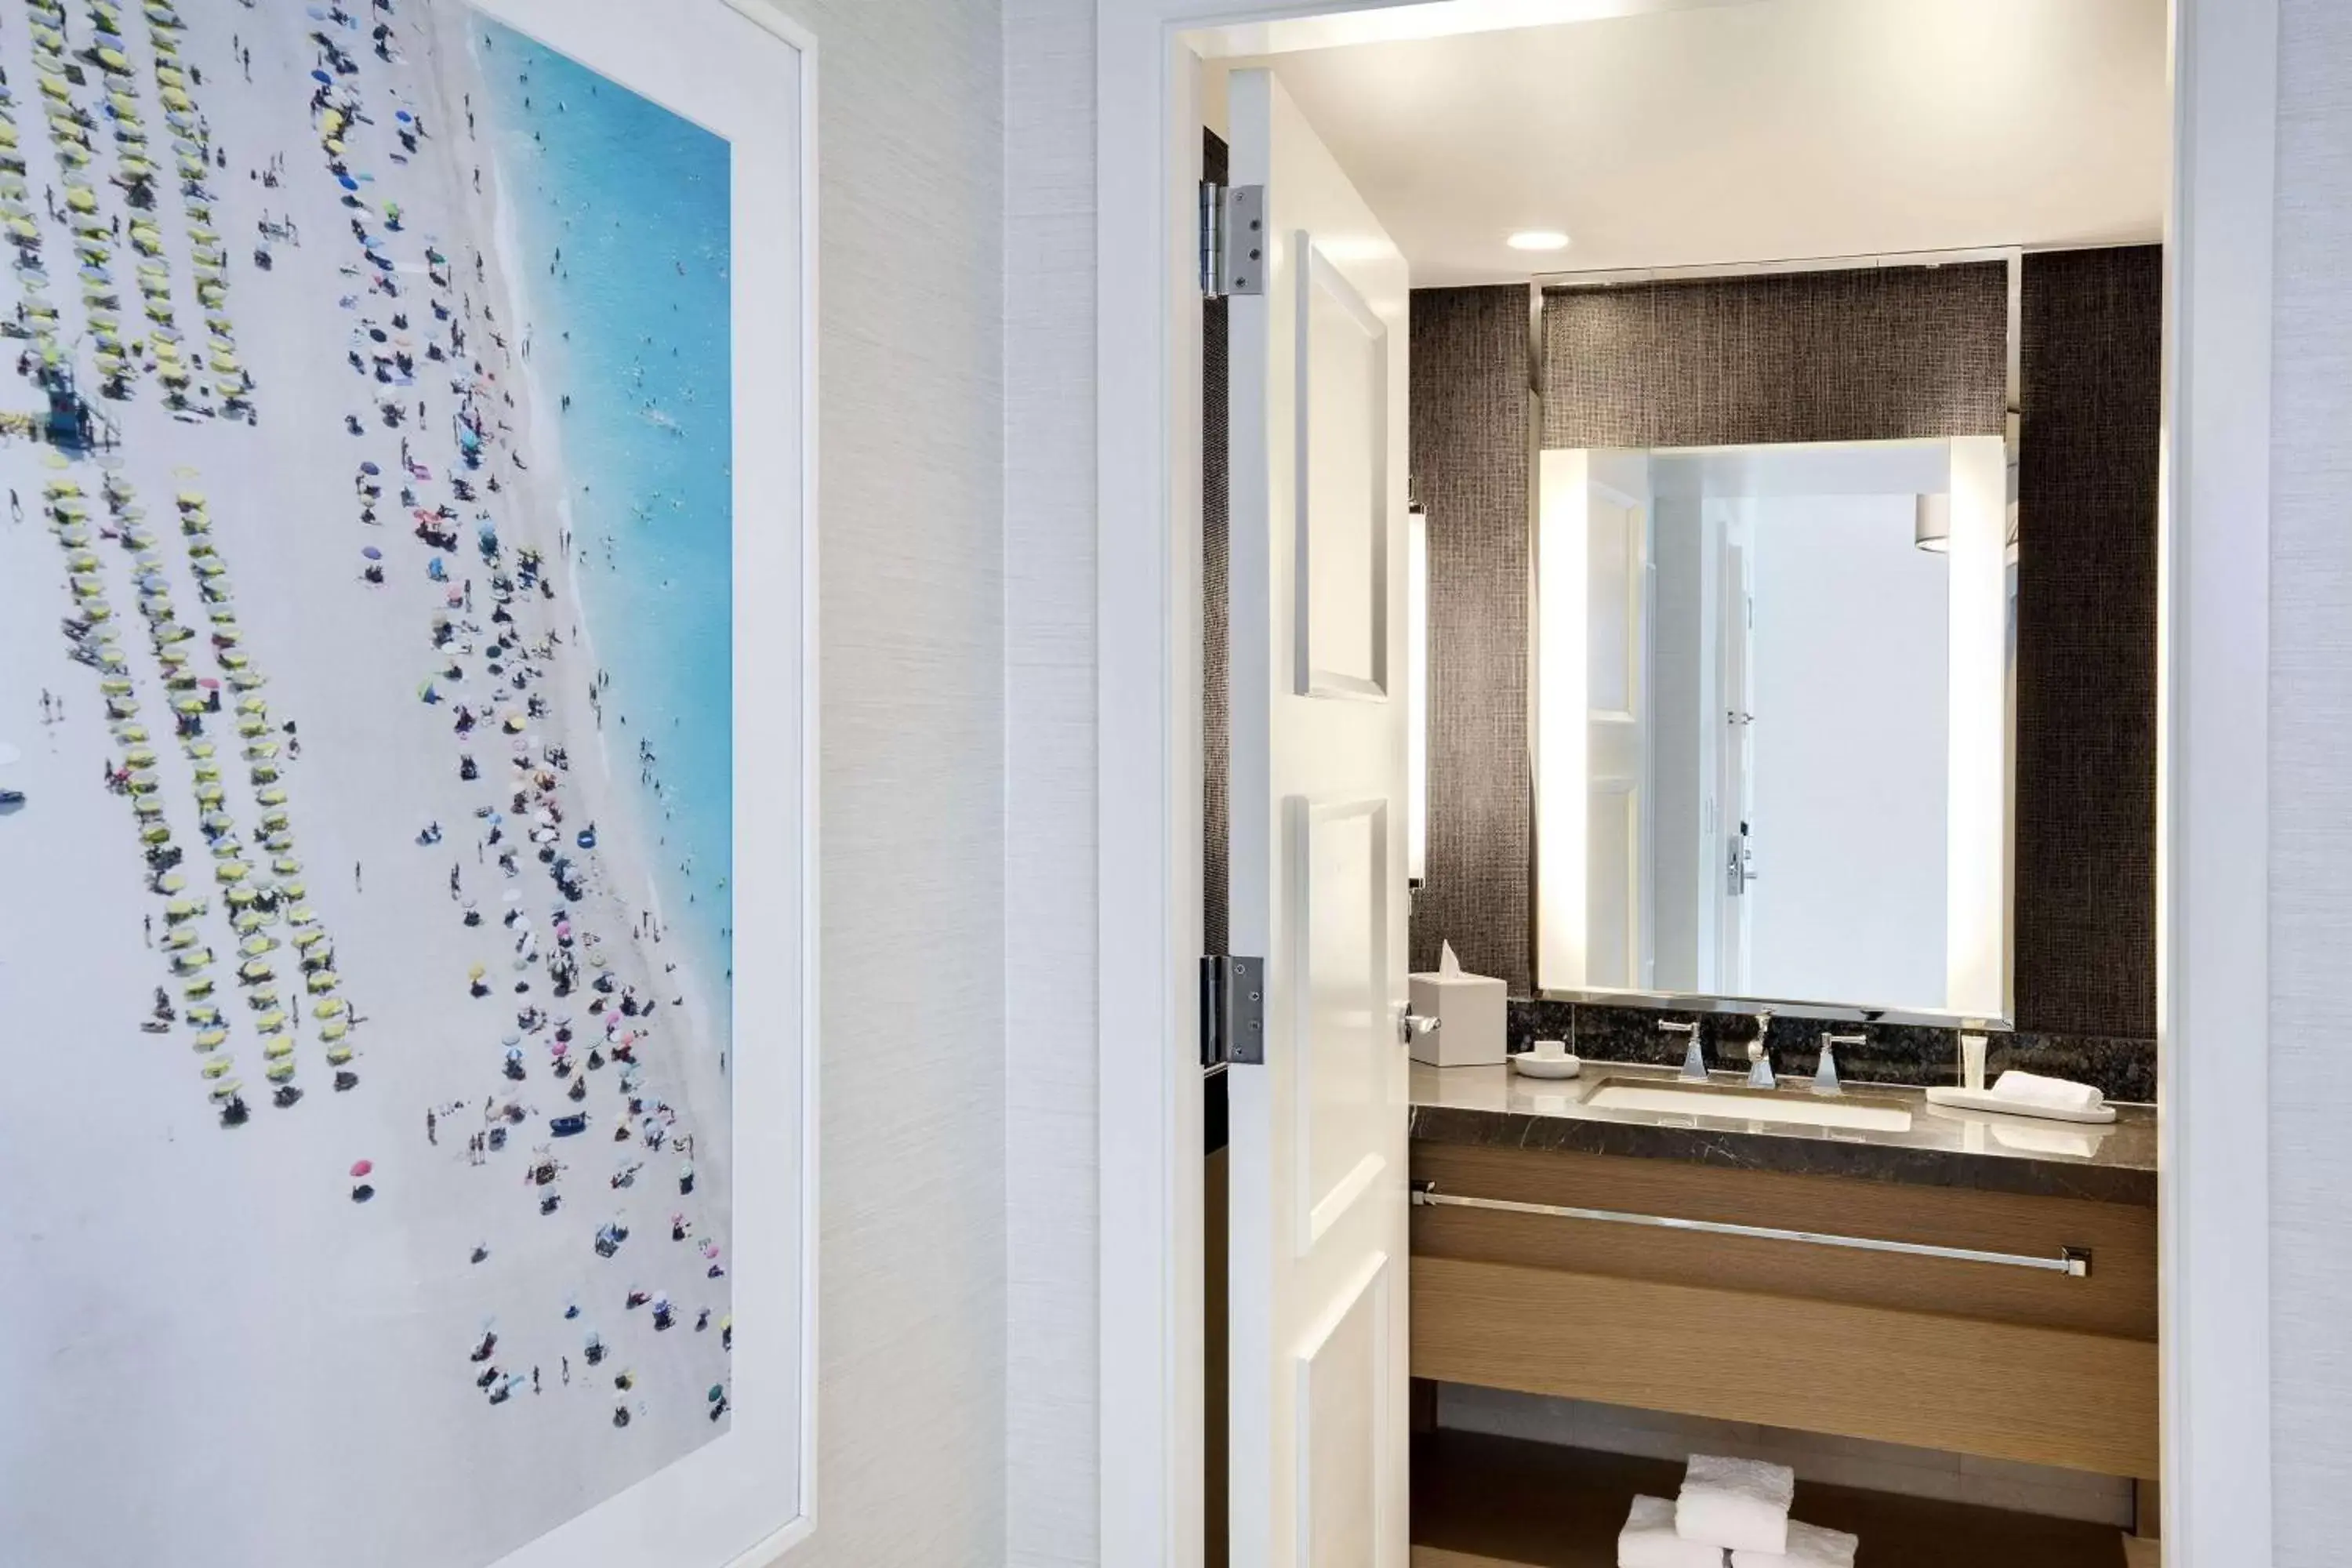 Bathroom in The Diplomat Beach Resort Hollywood, Curio Collection by Hilton